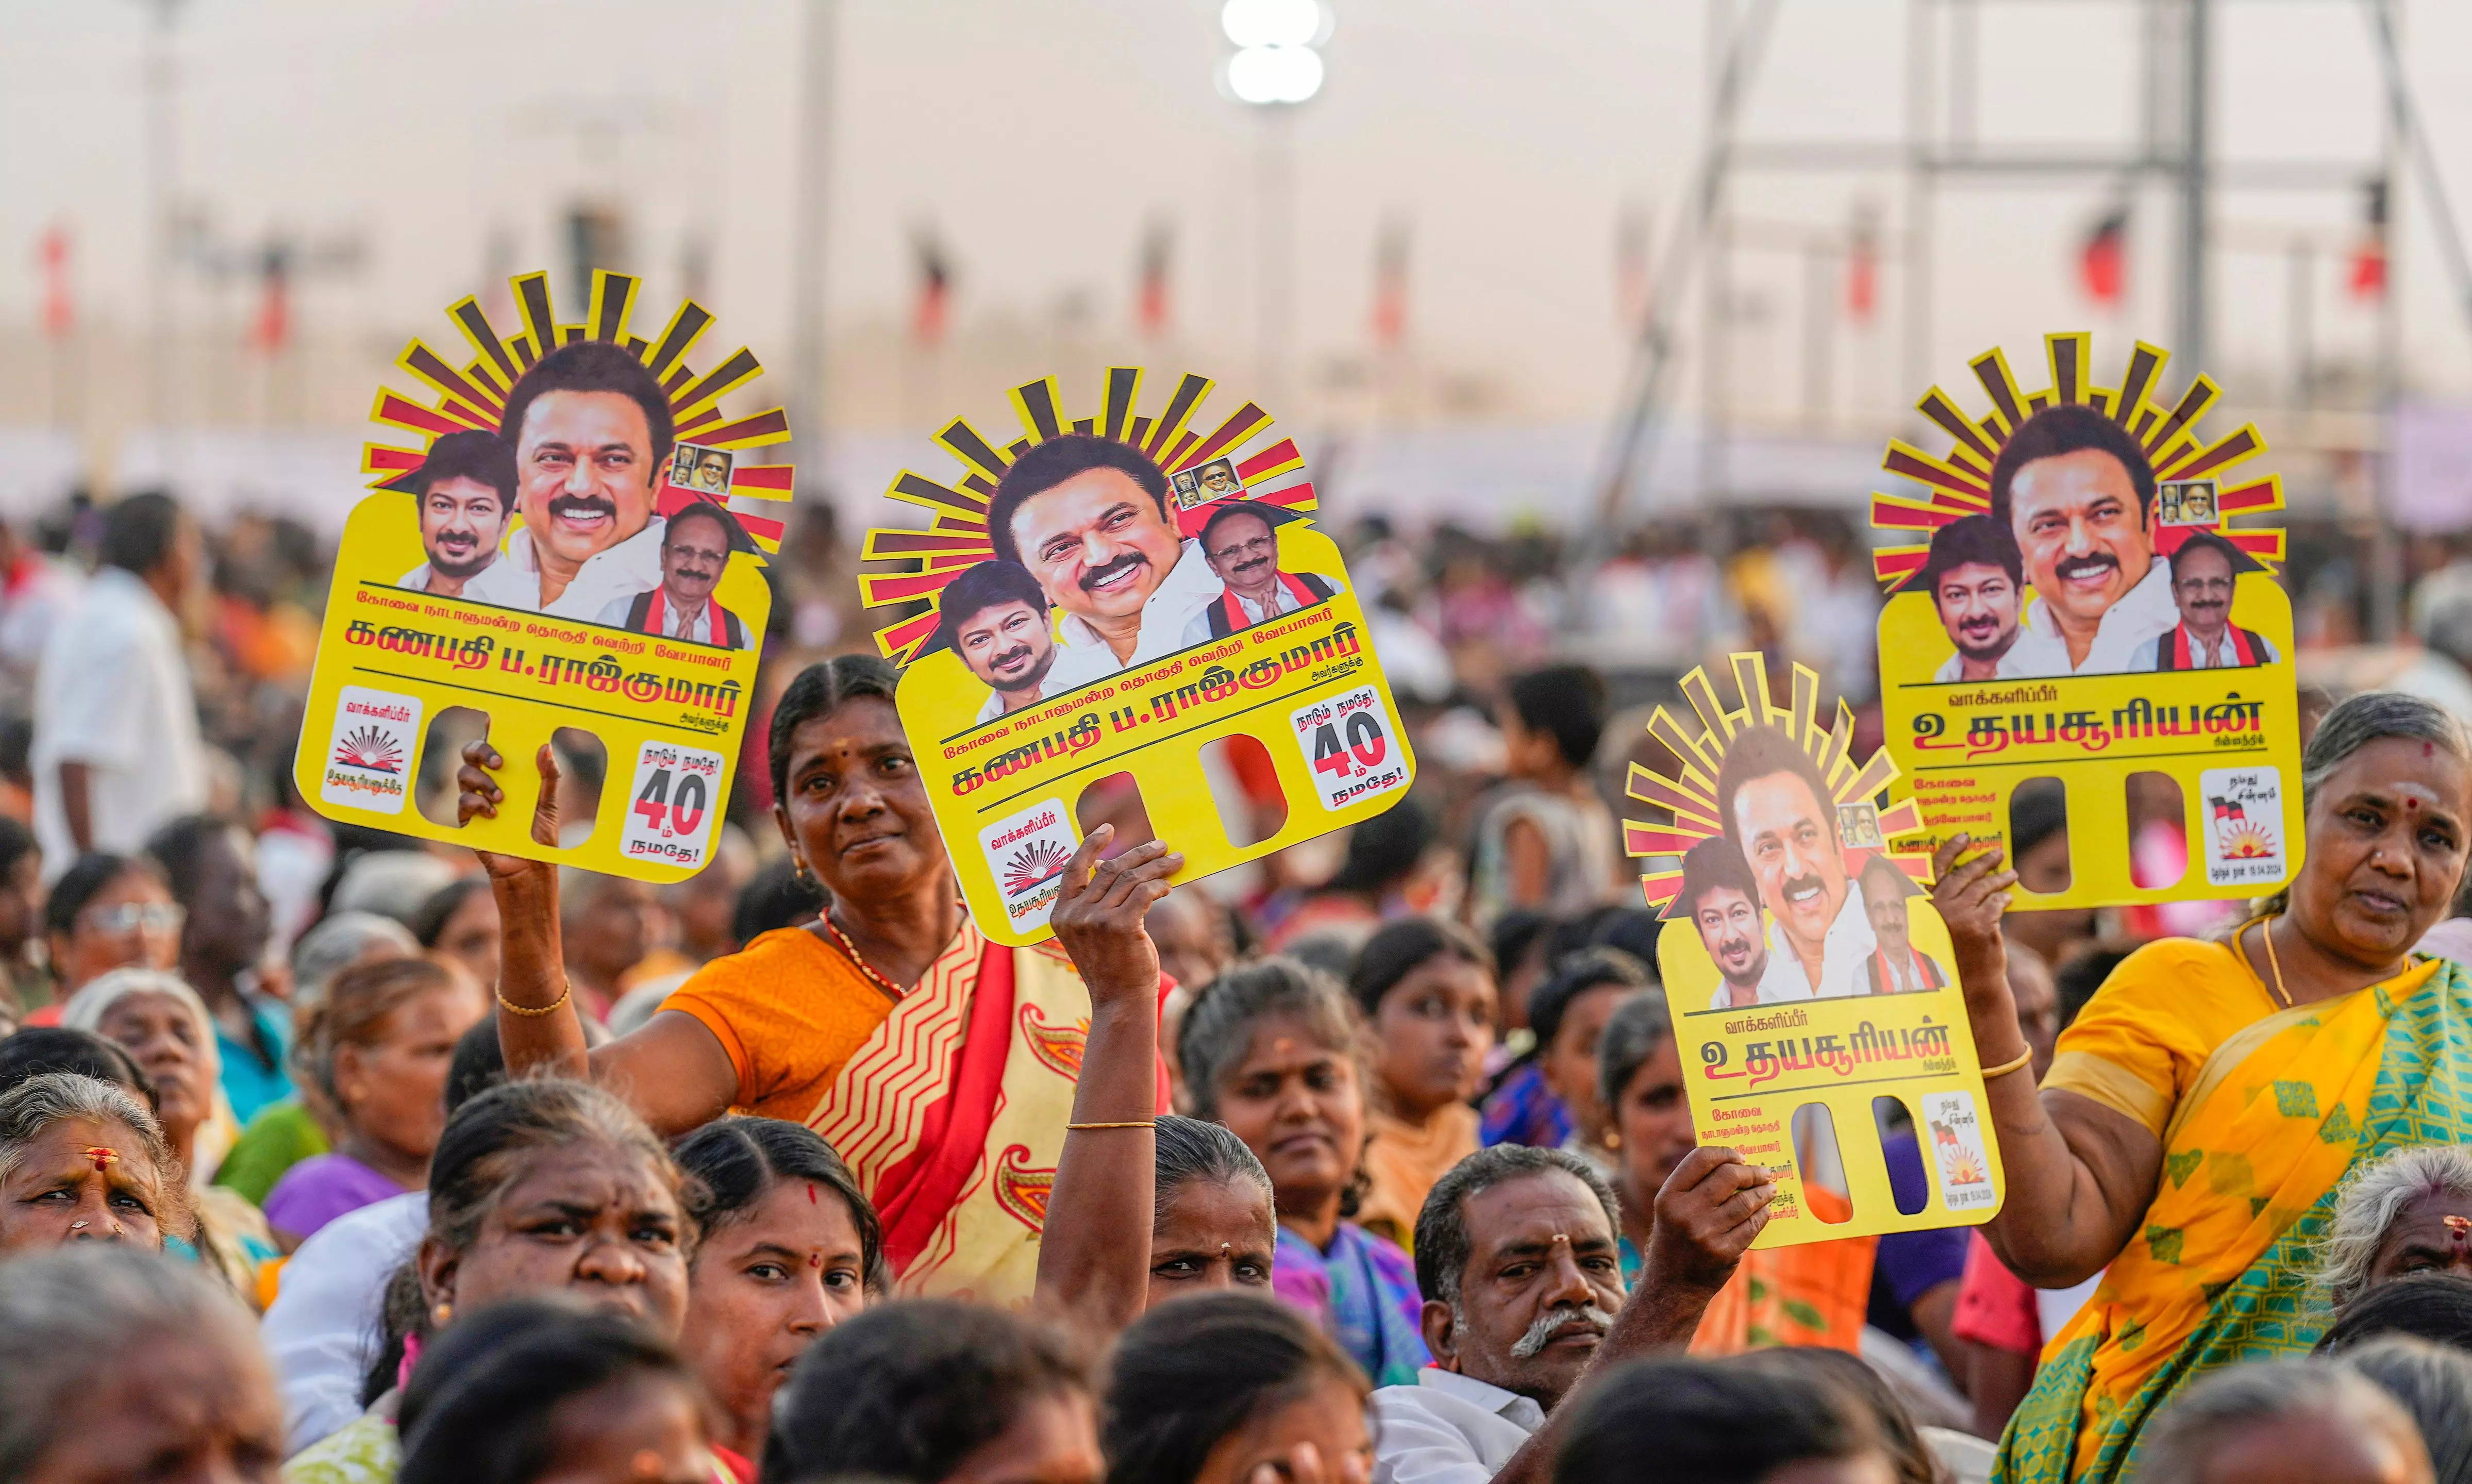 Tamil Nadu: As parties are well aware, women voters are key to success